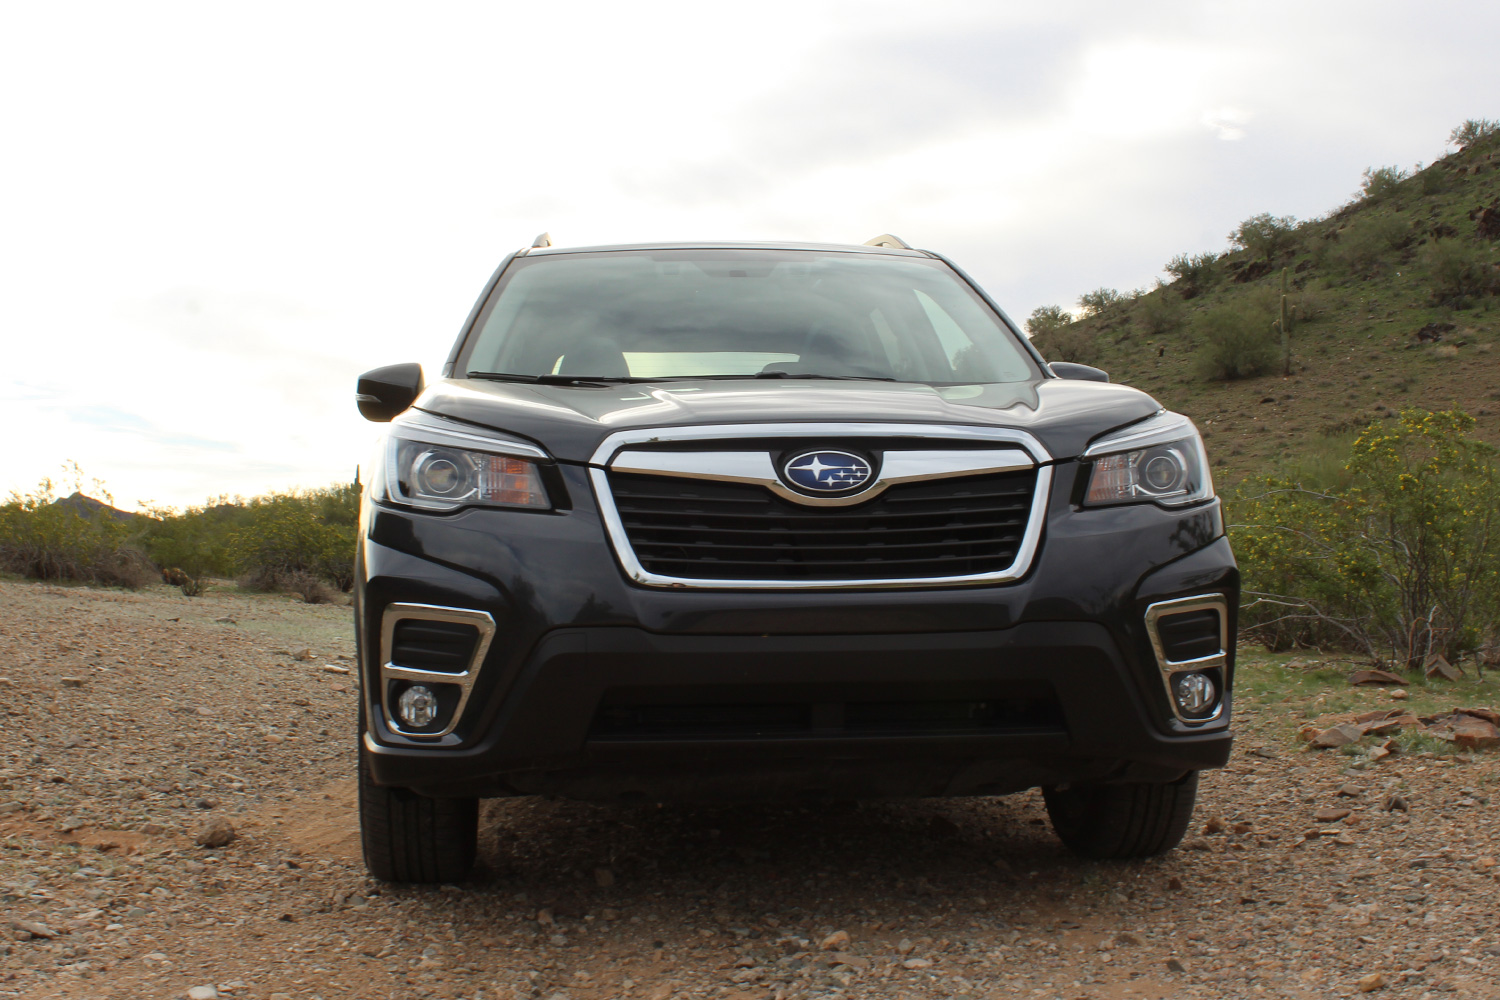 subaru forester modelo 2019 revision review front